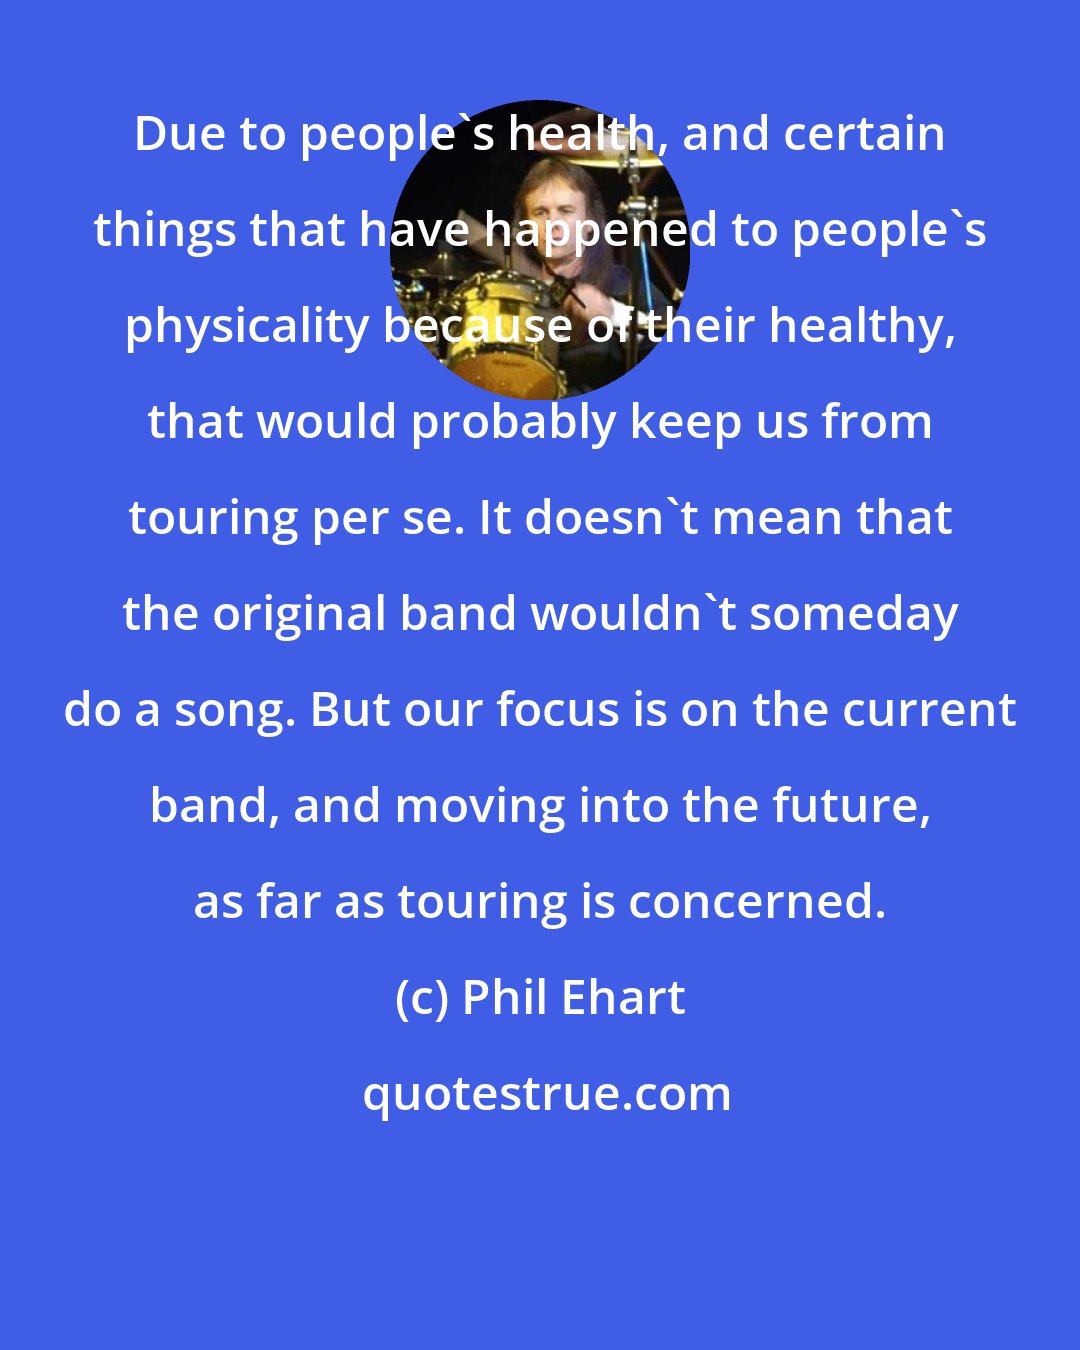 Phil Ehart: Due to people's health, and certain things that have happened to people's physicality because of their healthy, that would probably keep us from touring per se. It doesn't mean that the original band wouldn't someday do a song. But our focus is on the current band, and moving into the future, as far as touring is concerned.